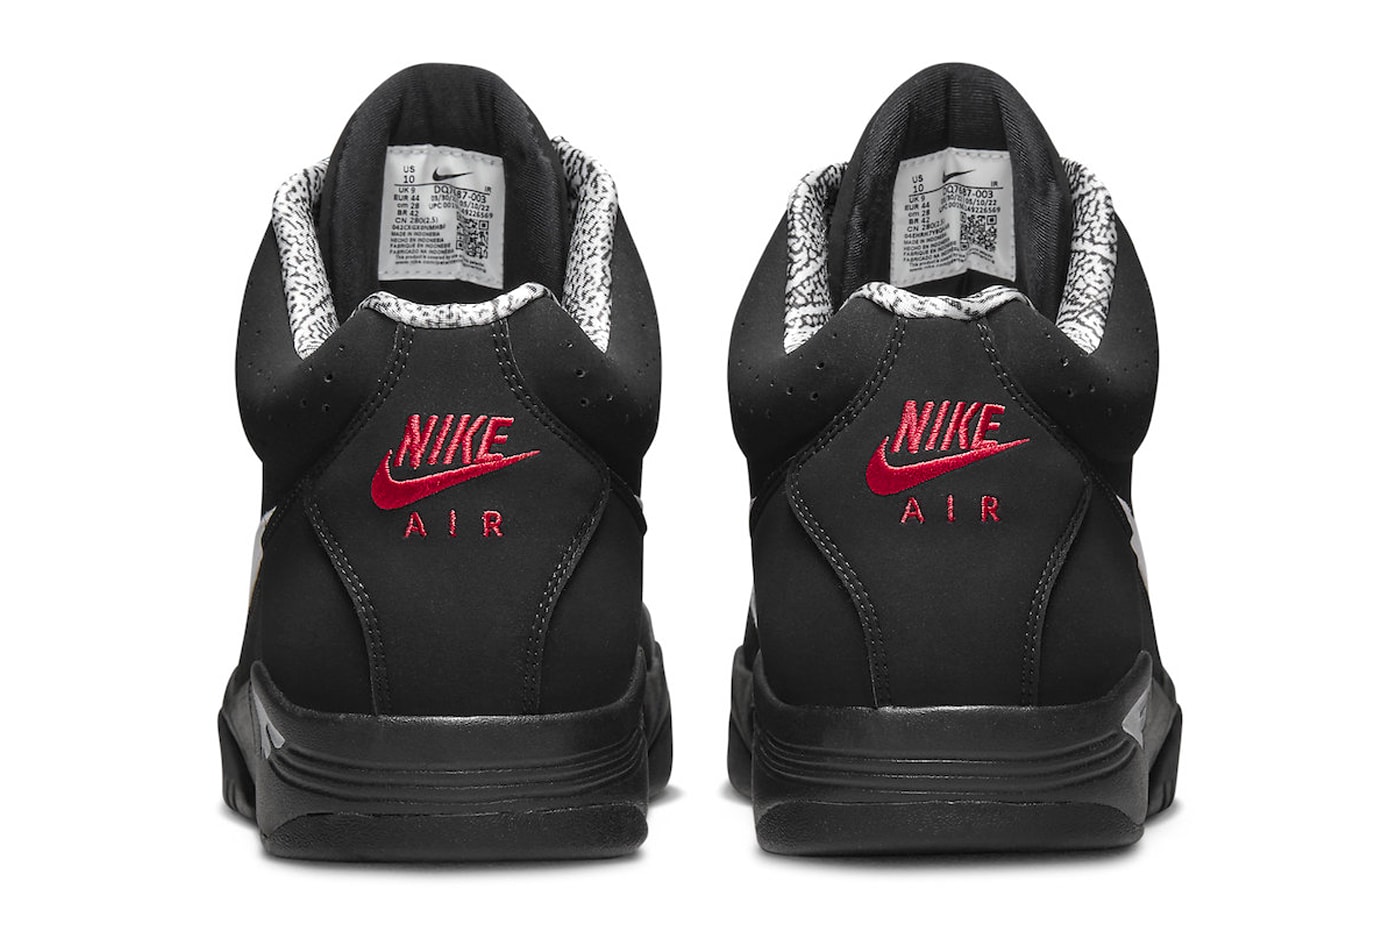 Nike Air Flight Lite Mid Black White Varsity Red Official Look Release Info DQ7687-003 Date Buy Price 